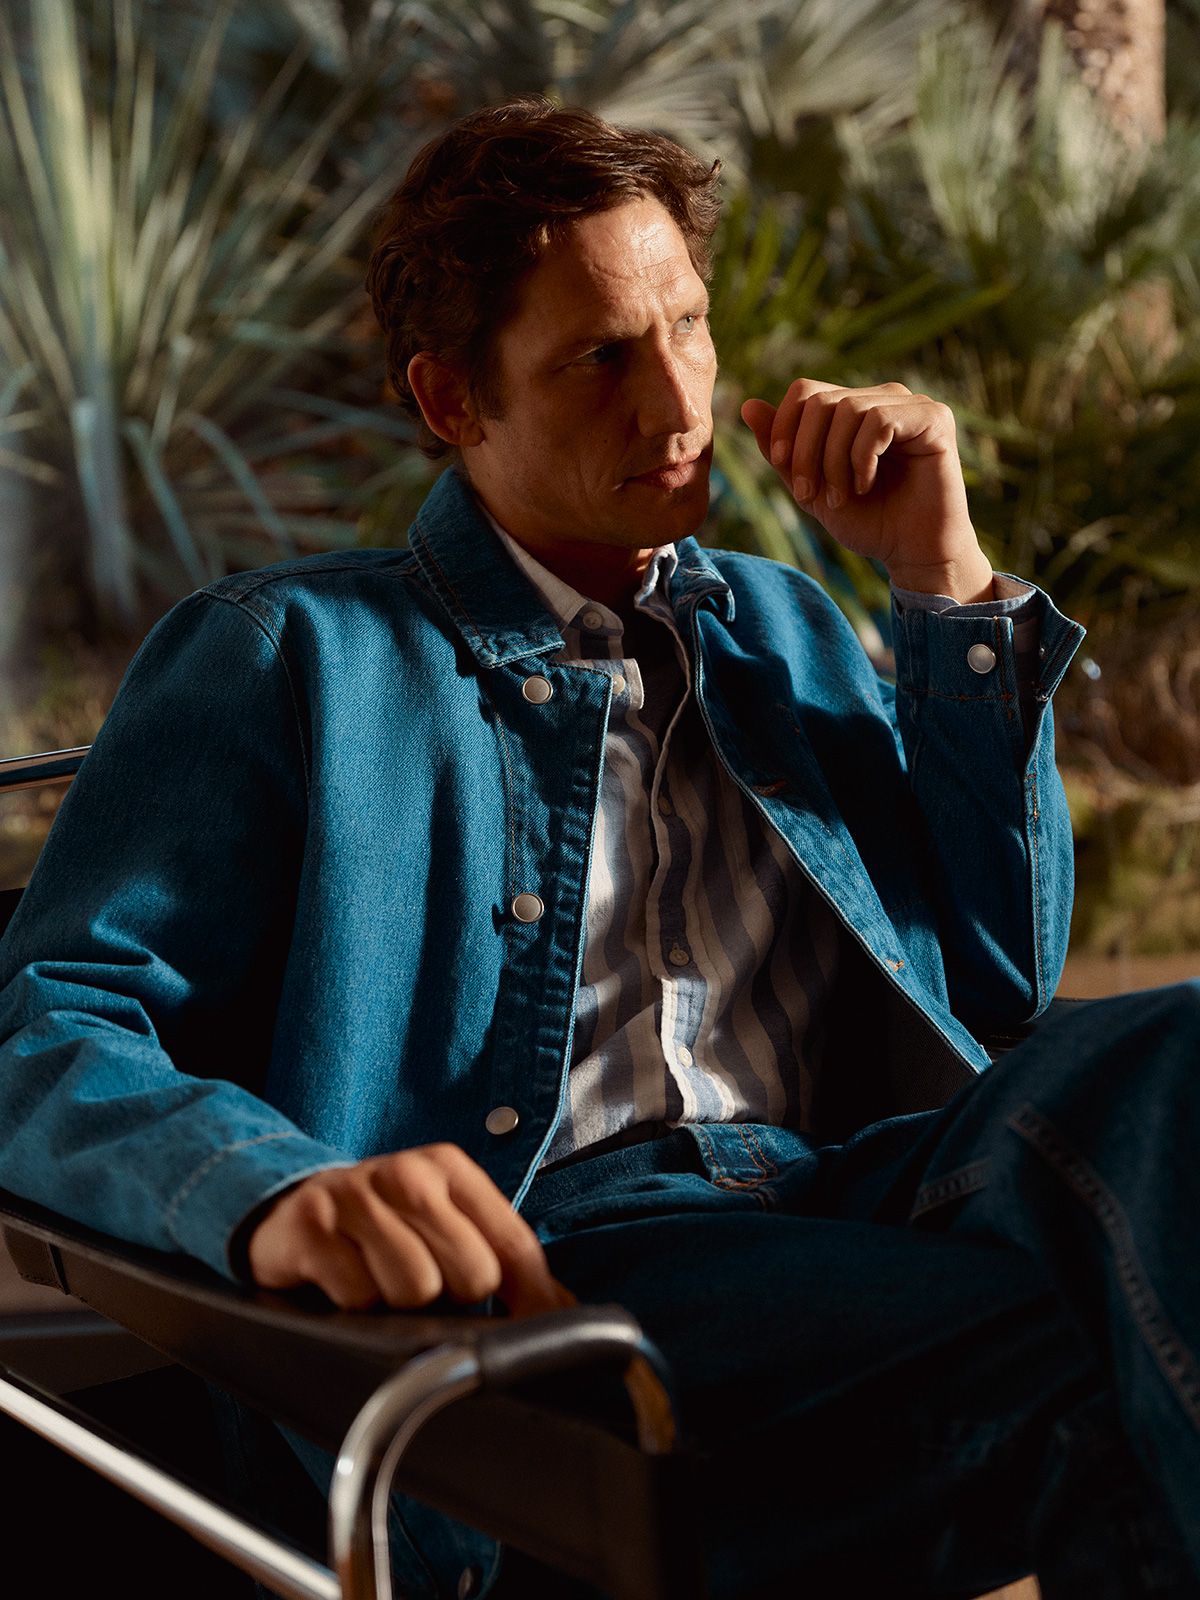 Image of a man sitting down in a denim jacket with a jungle backdrop behind him